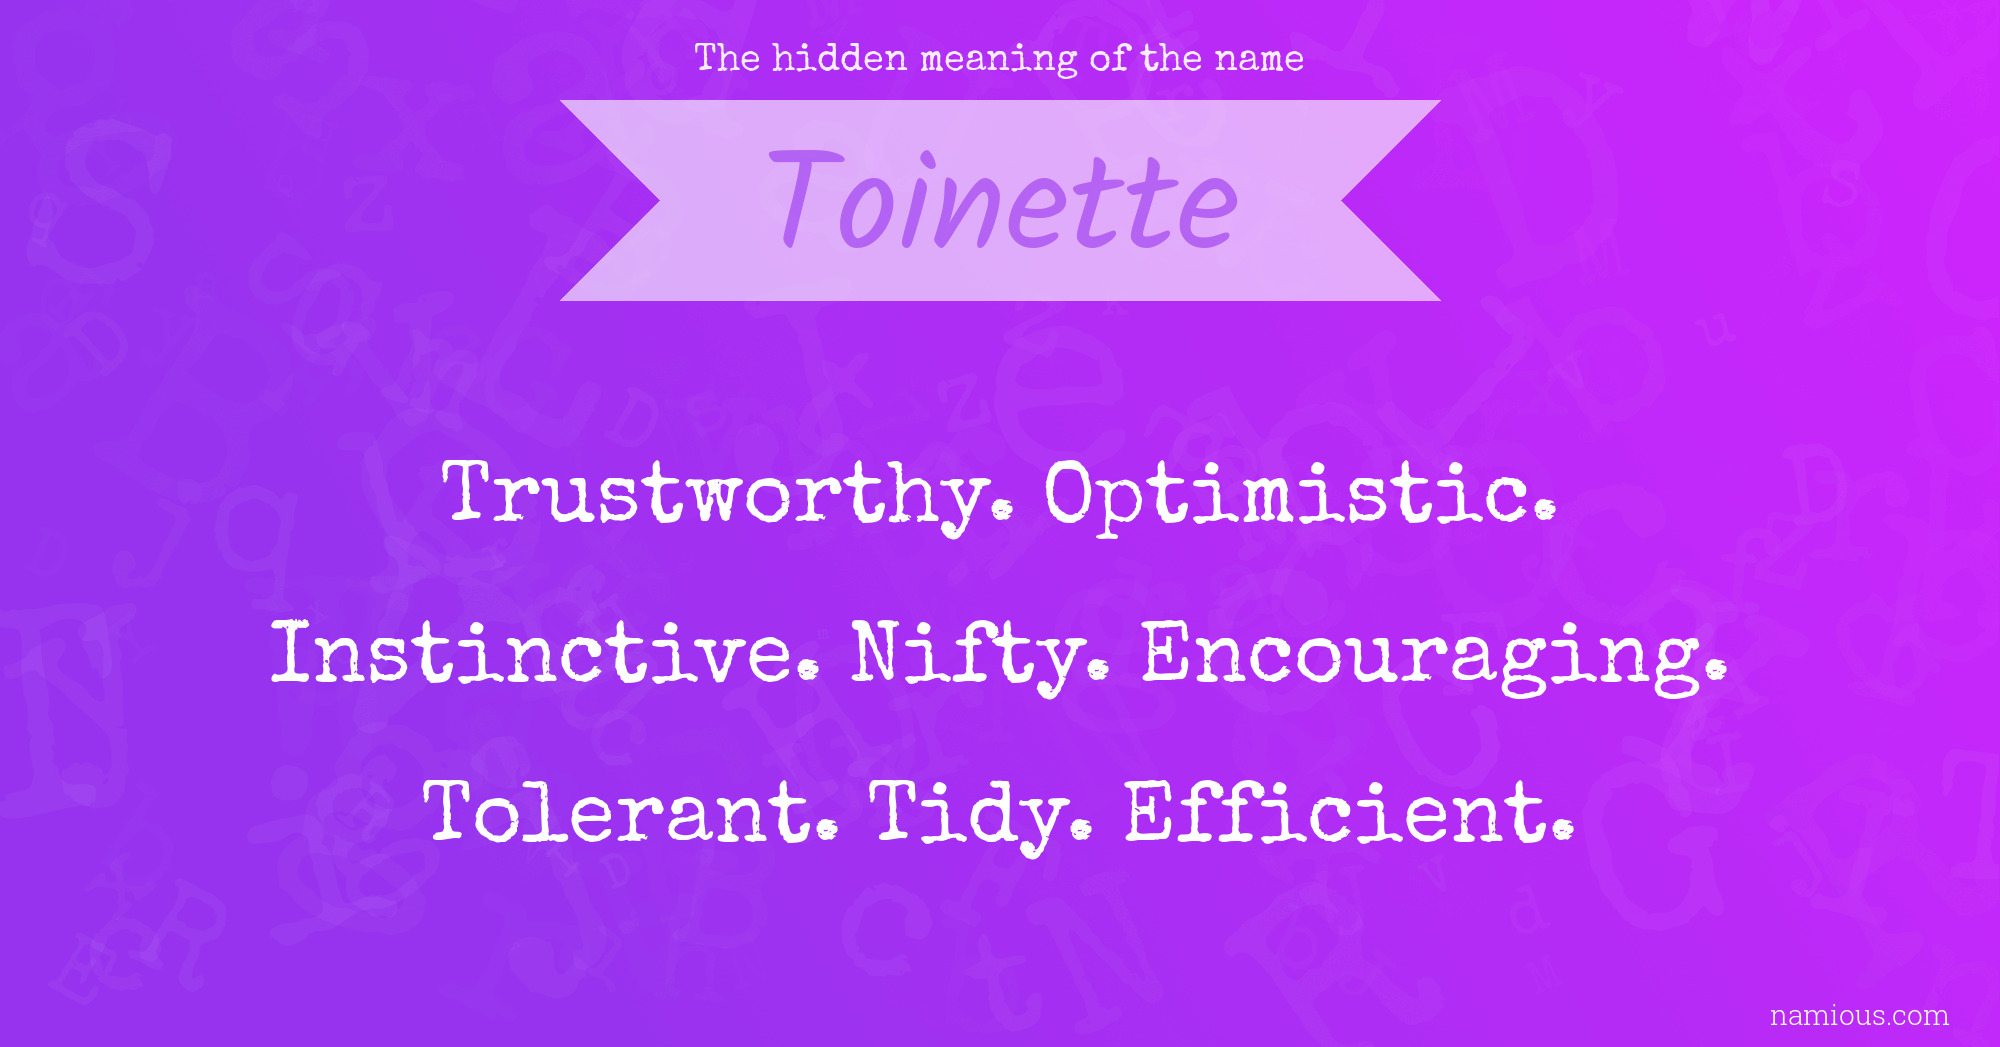 The hidden meaning of the name Toinette